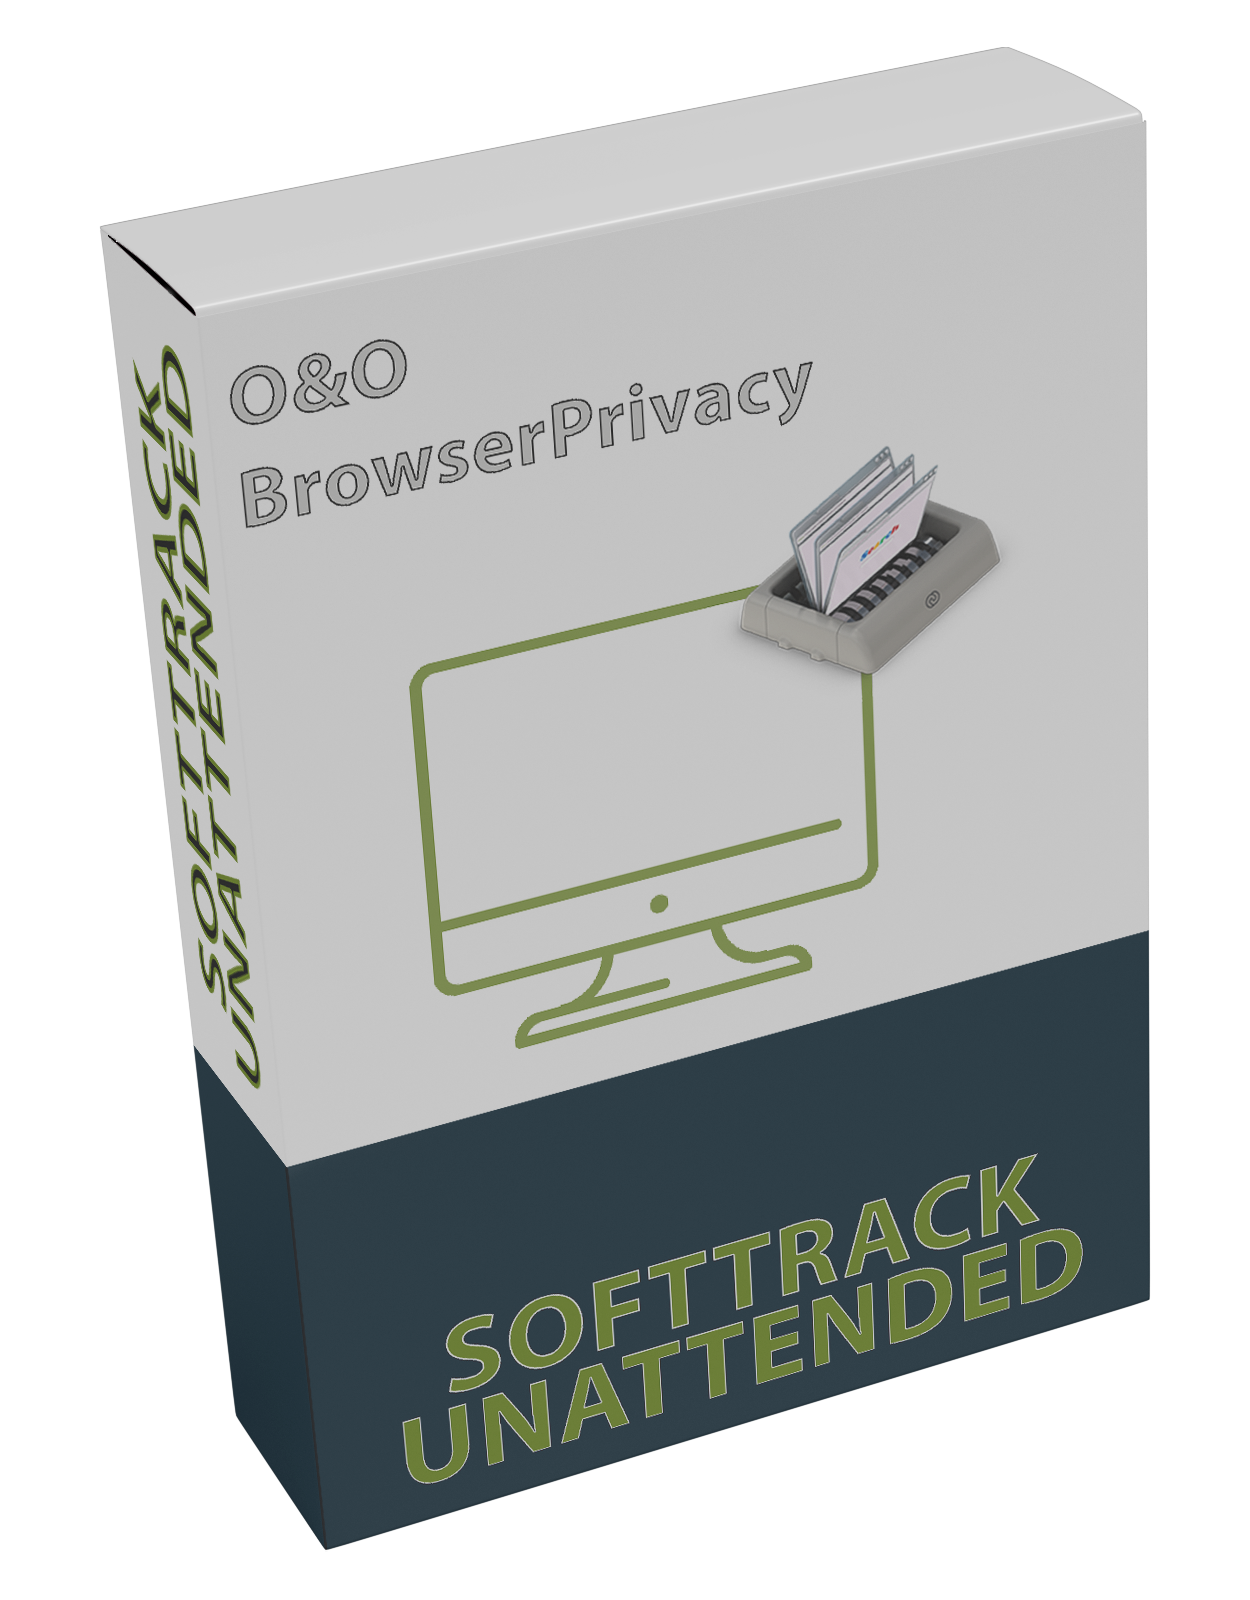 O&O BrowserPrivacy 16.13.86 UNATTENDED